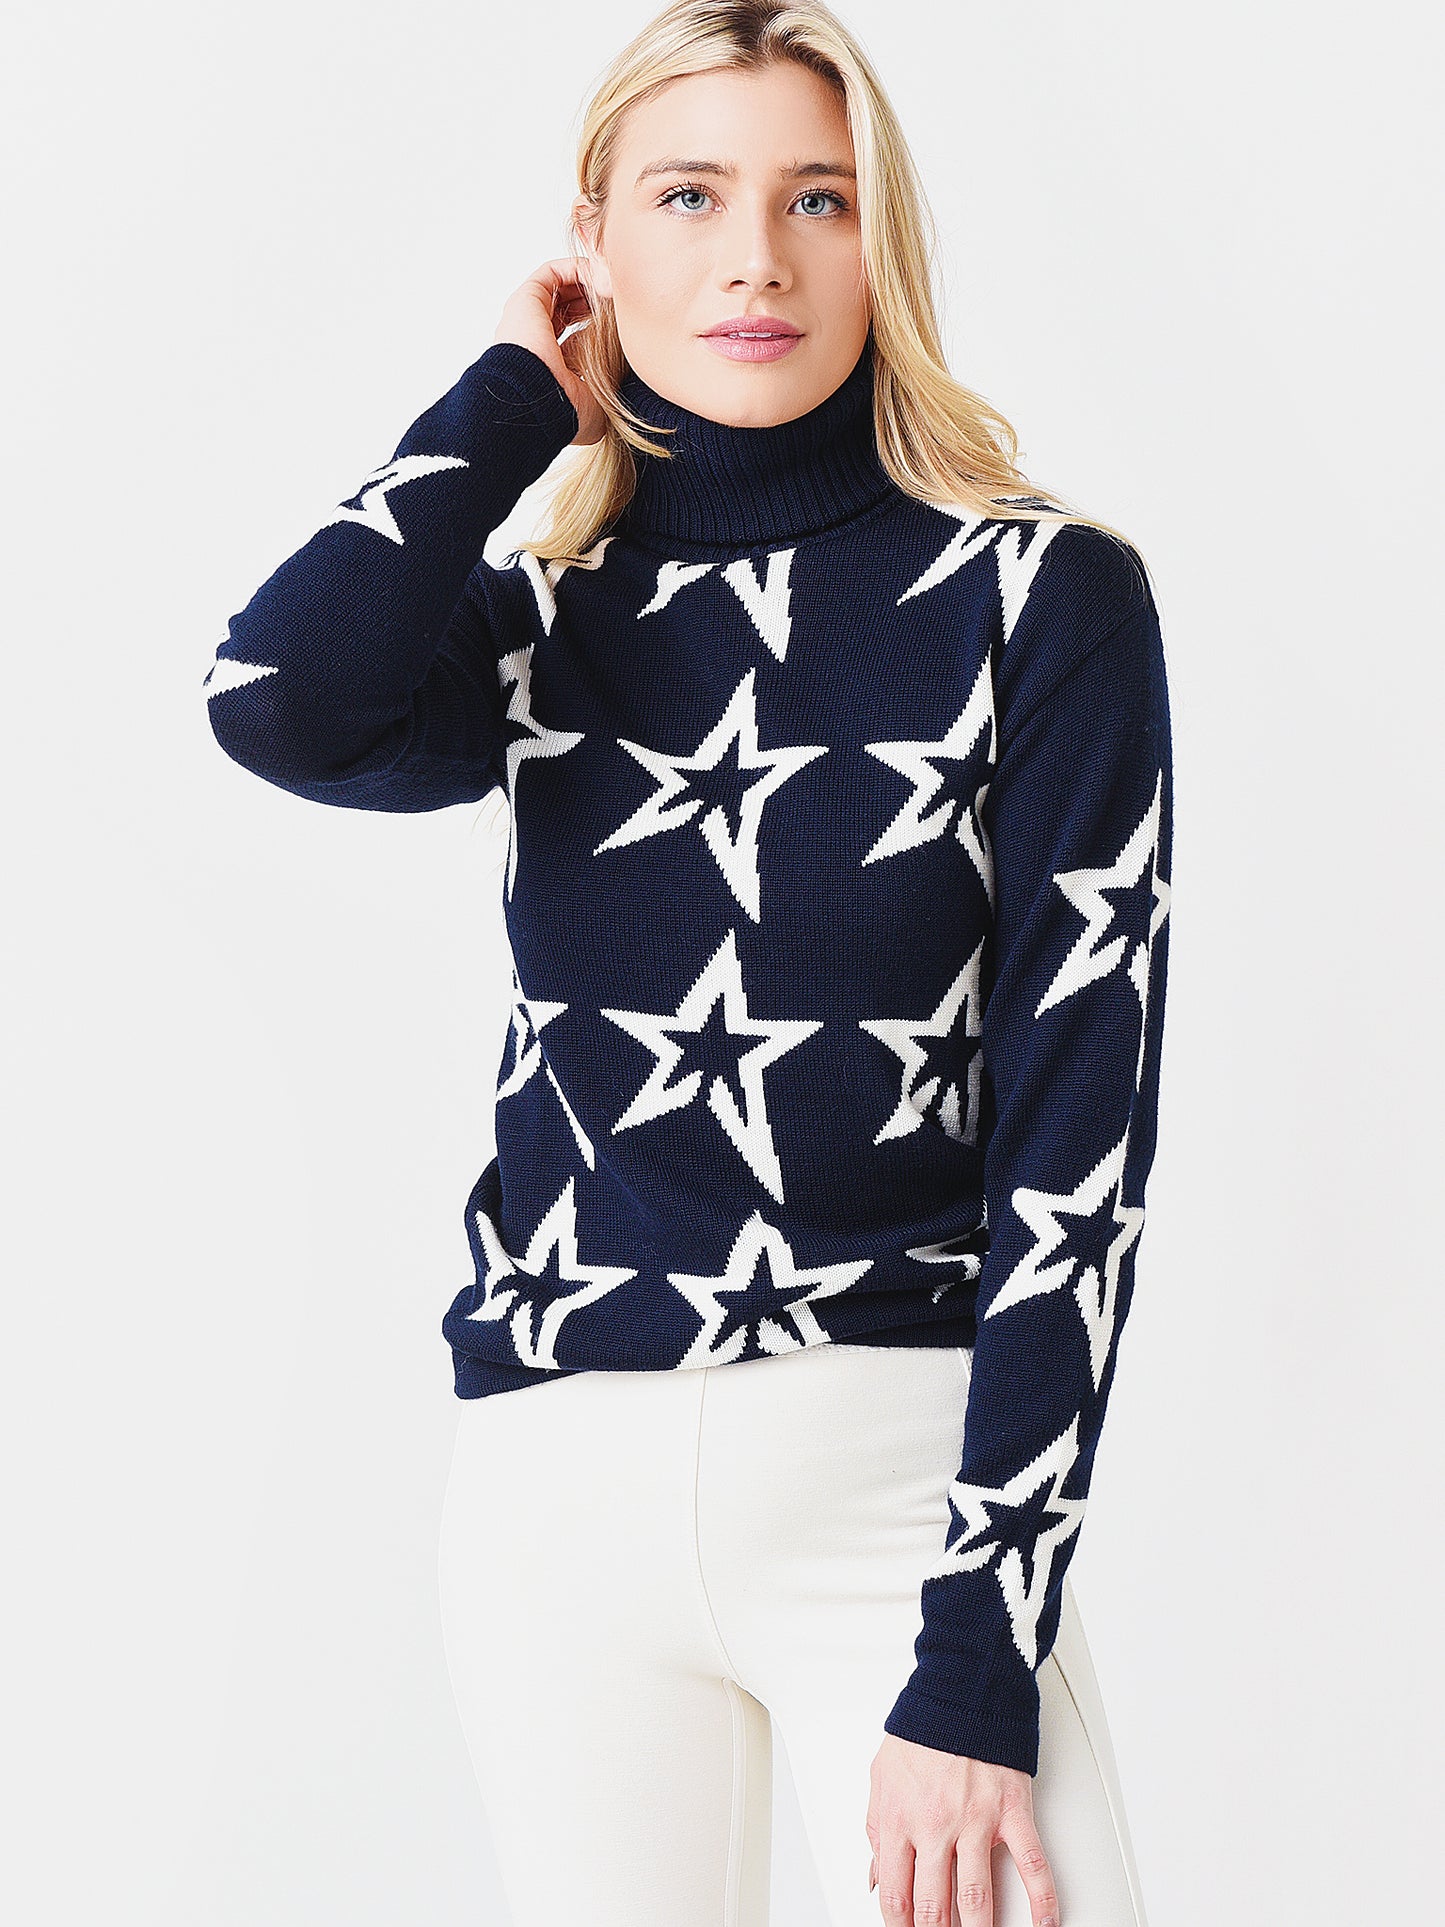 Perfect Moment Women's Star Dust Sweater